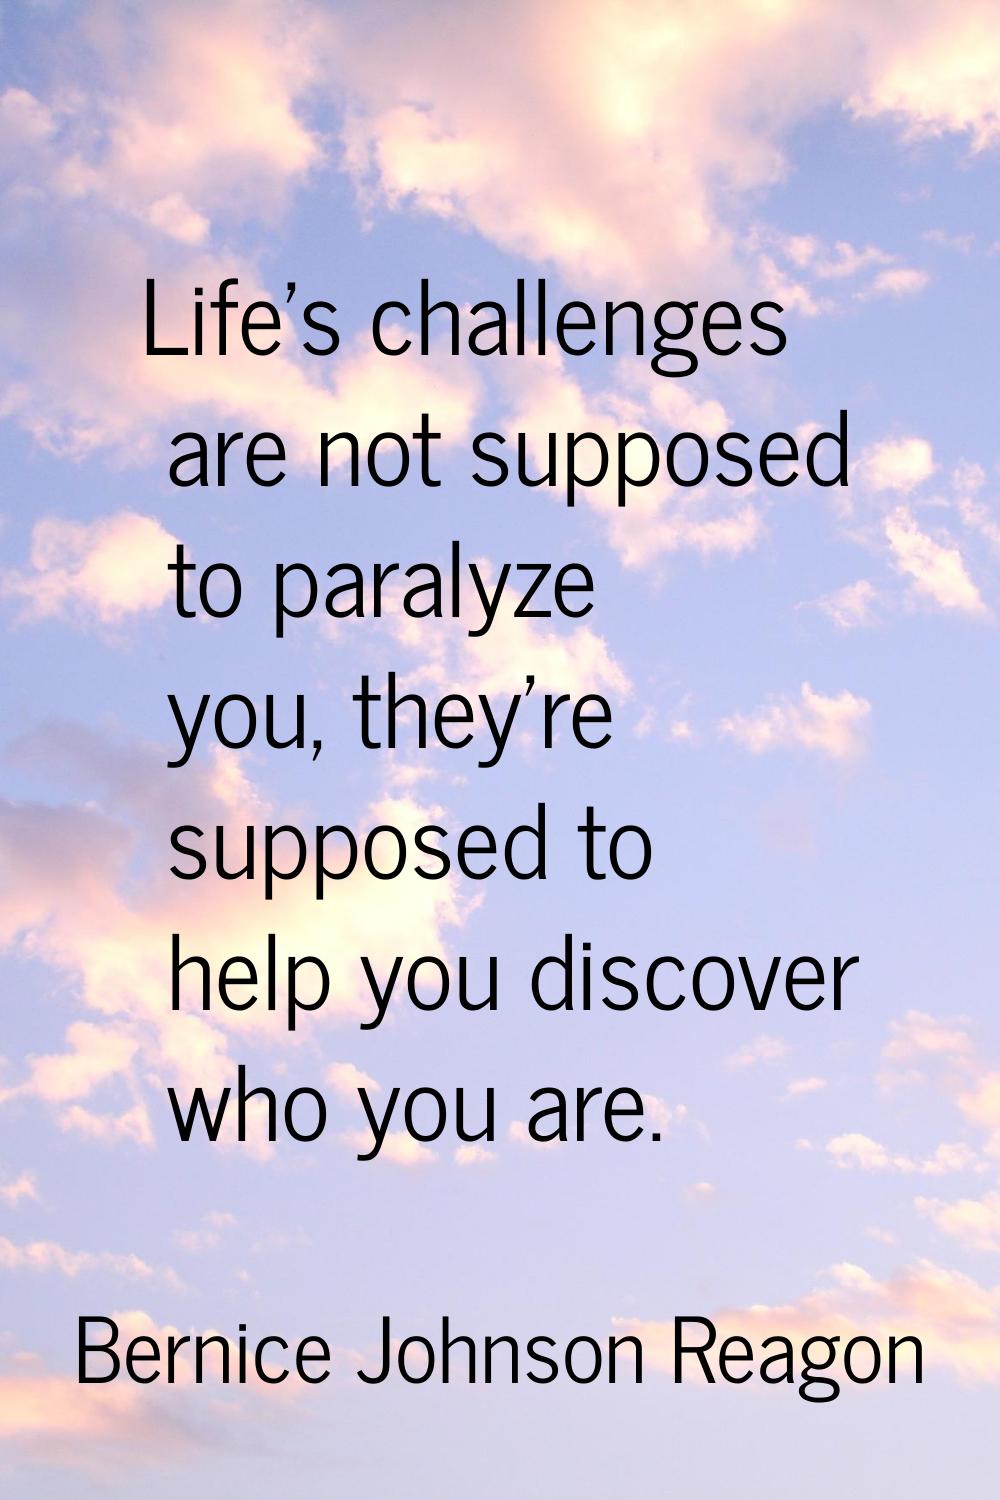 Life's challenges are not supposed to paralyze you, they're supposed to help you discover who you a